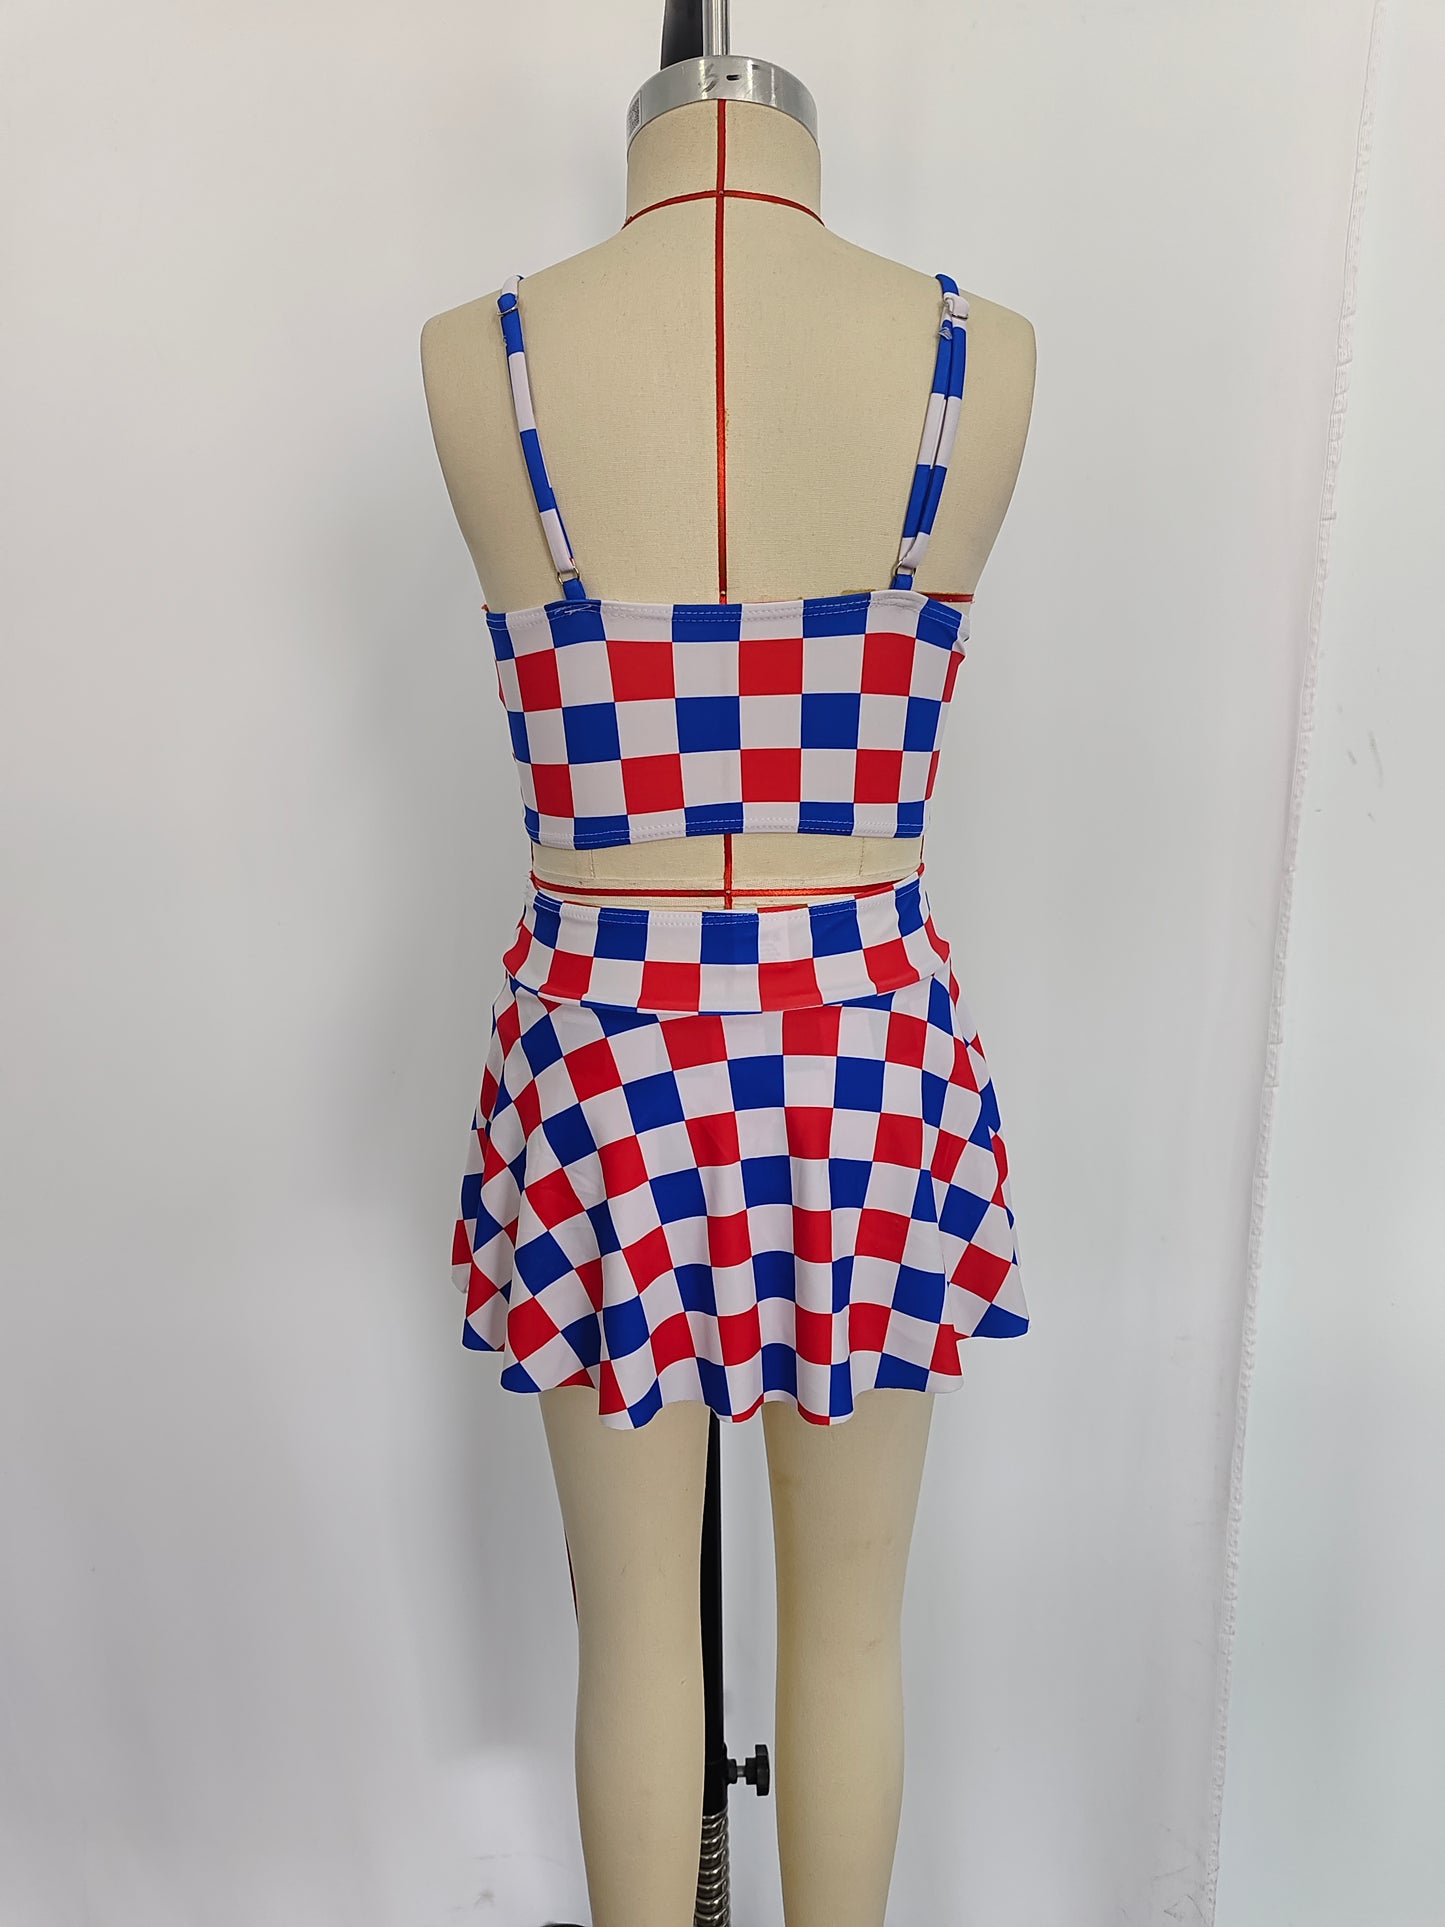 S0287 Blue Red Plaid Print Girls 2 Pieces 4th of July Swimsuits